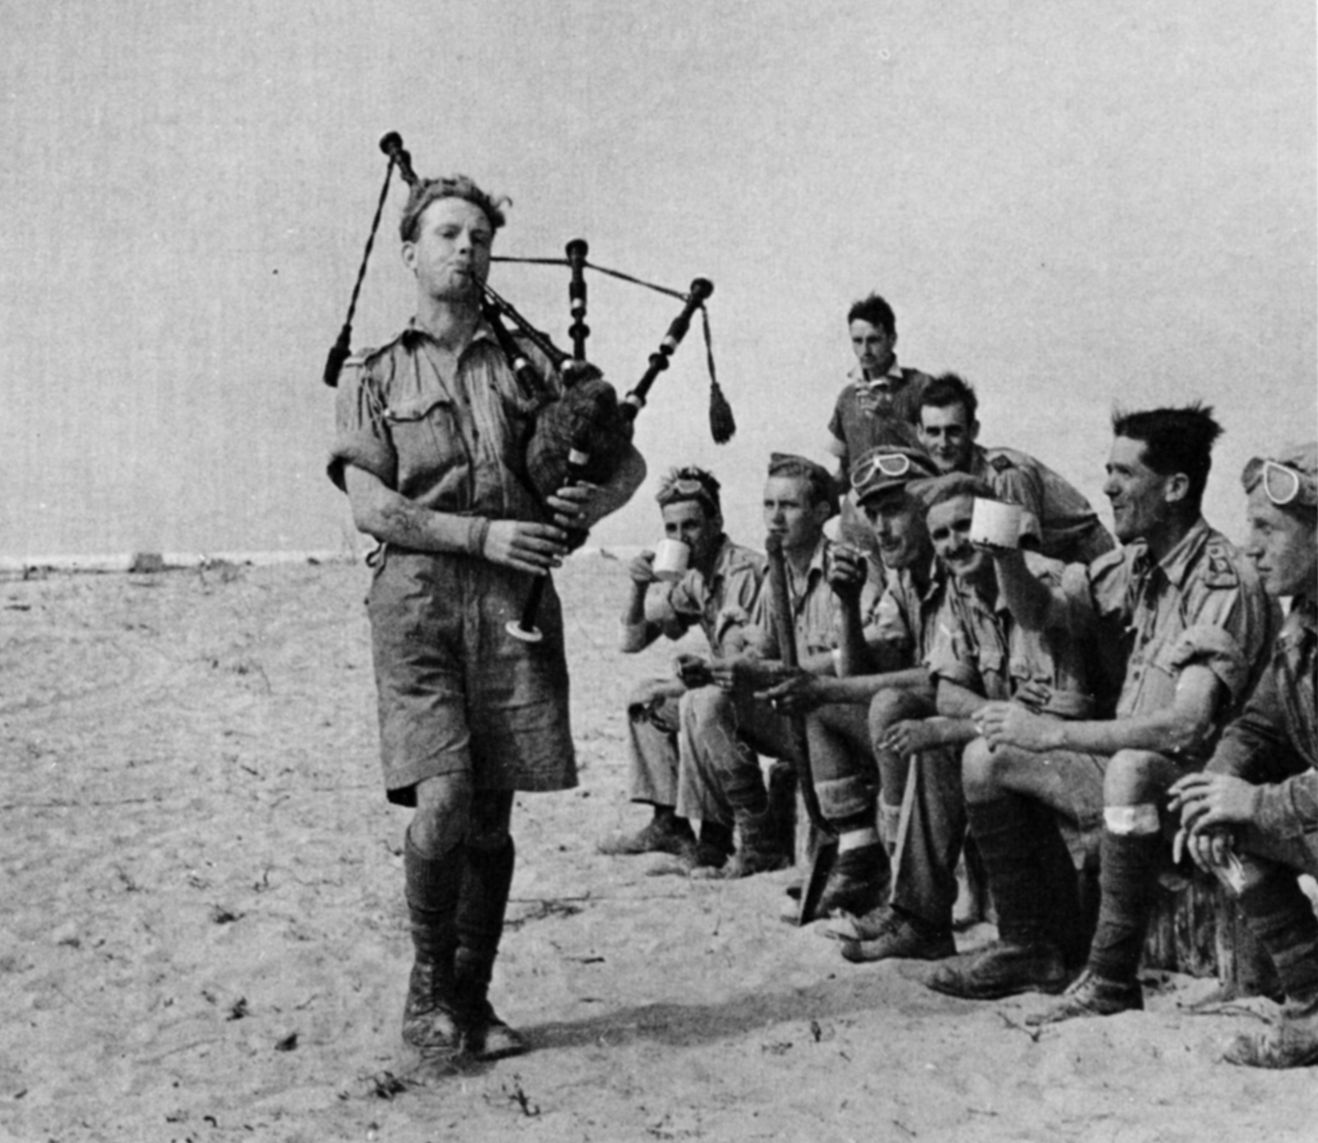 During a lull in the desert fighting, a bagpiper entertains British soldiers with an impromptu concert.